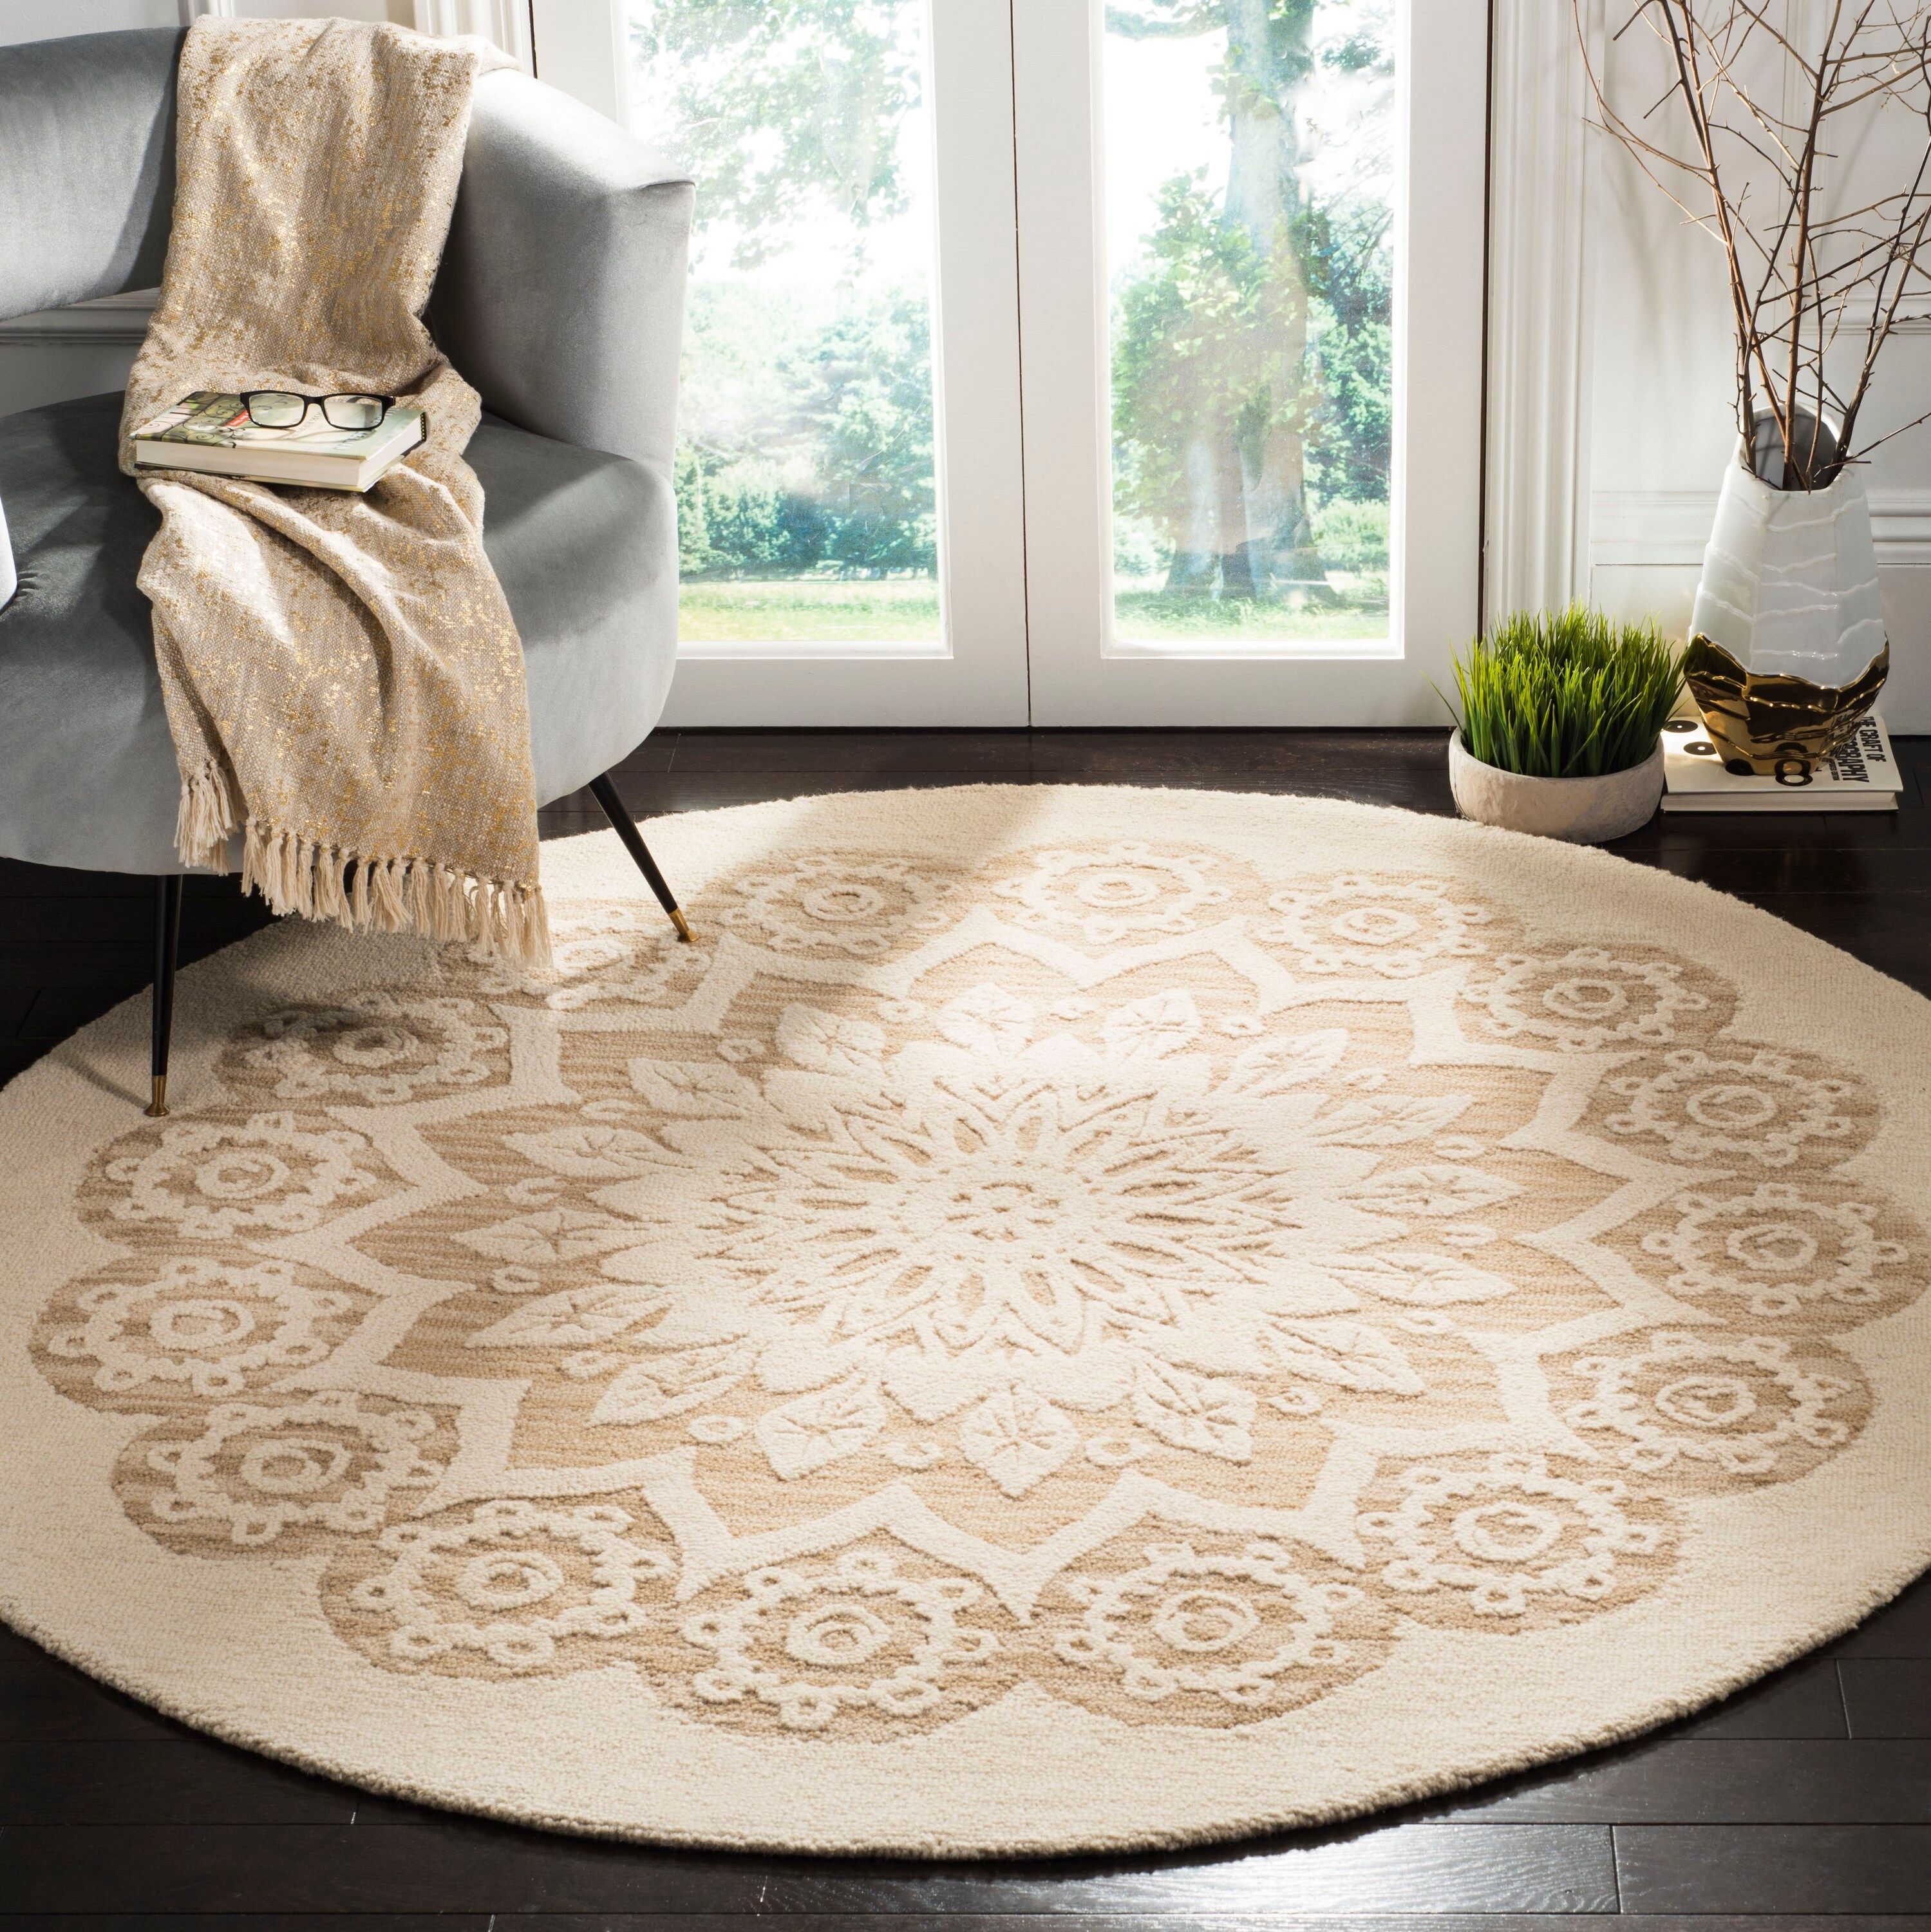 Safavieh Blossom Gladwin 6 X 6 Wool Ivory/beige Round Indoor  Floral/botanical Bohemian/eclectic Area Rug In The Rugs Department At  Lowes Throughout Ivory Blossom Round Rugs (View 3 of 15)